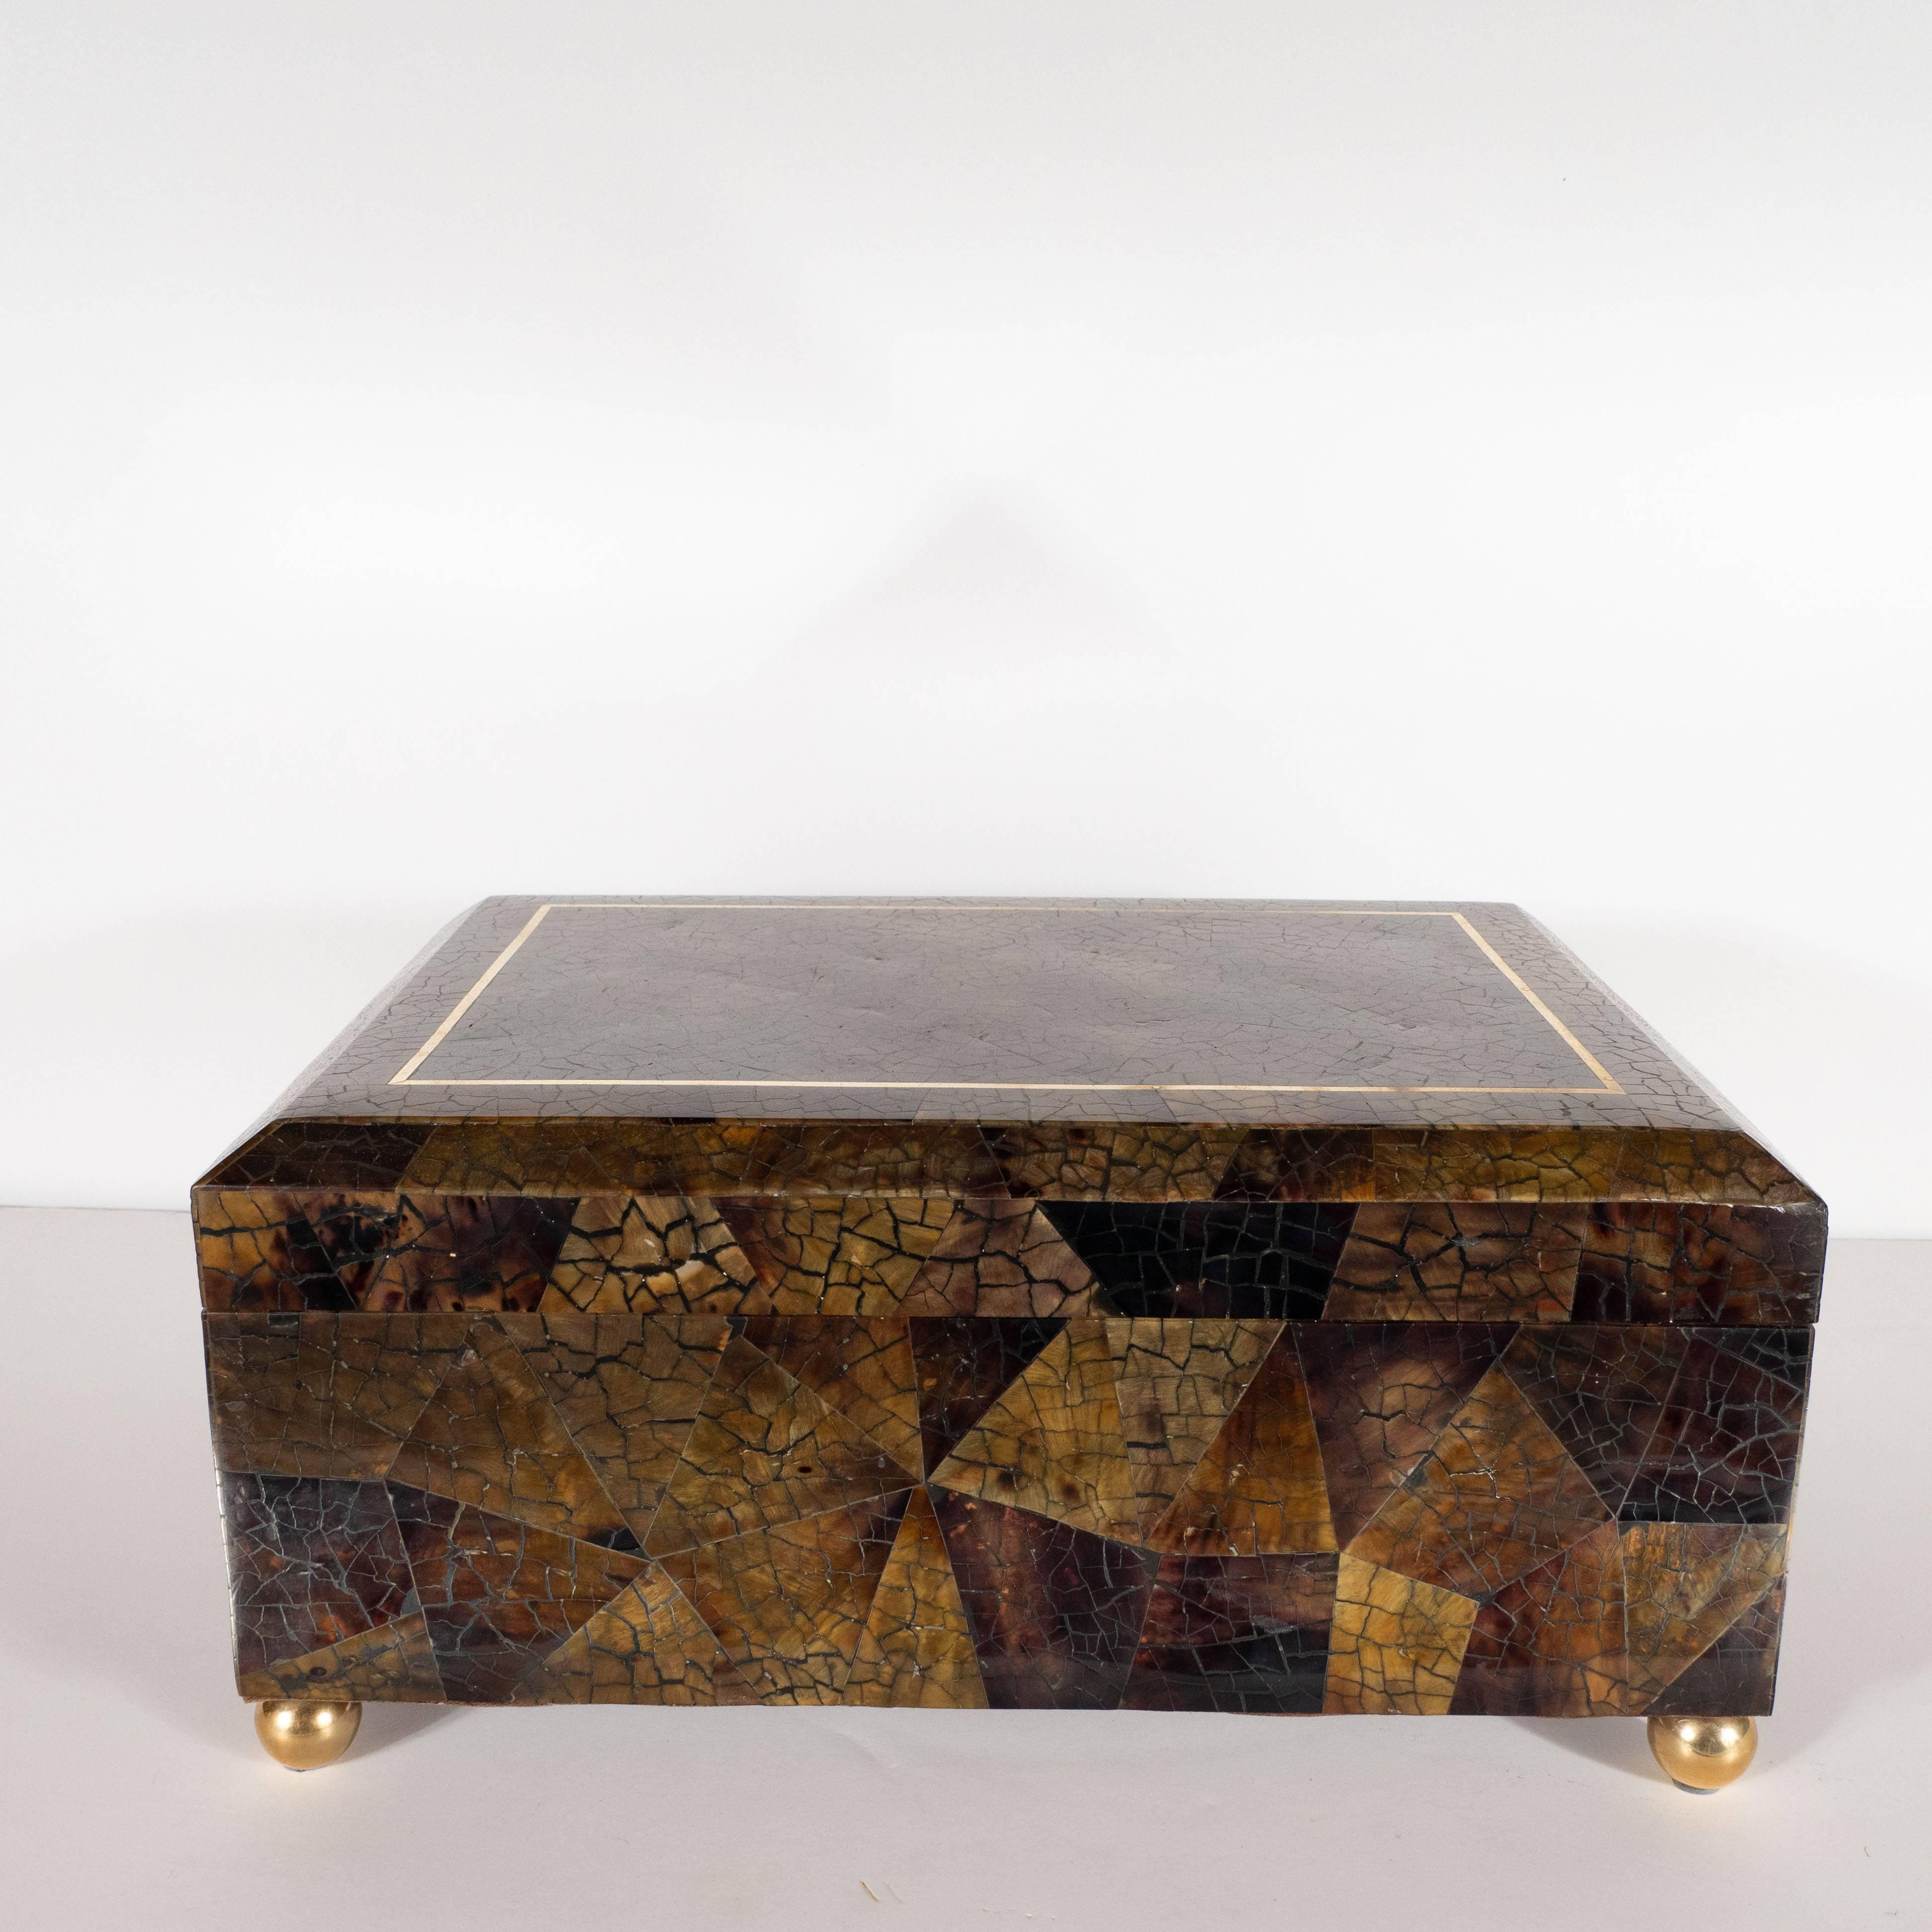 This stunning box was handmade in the Philippines, circa 1970. The rectangular box offers beveled edges as well as a mosaic of triangular forms in tessellated shell in honeyed tones of coffee and taupe. Additionally, the box has a rectangular brass